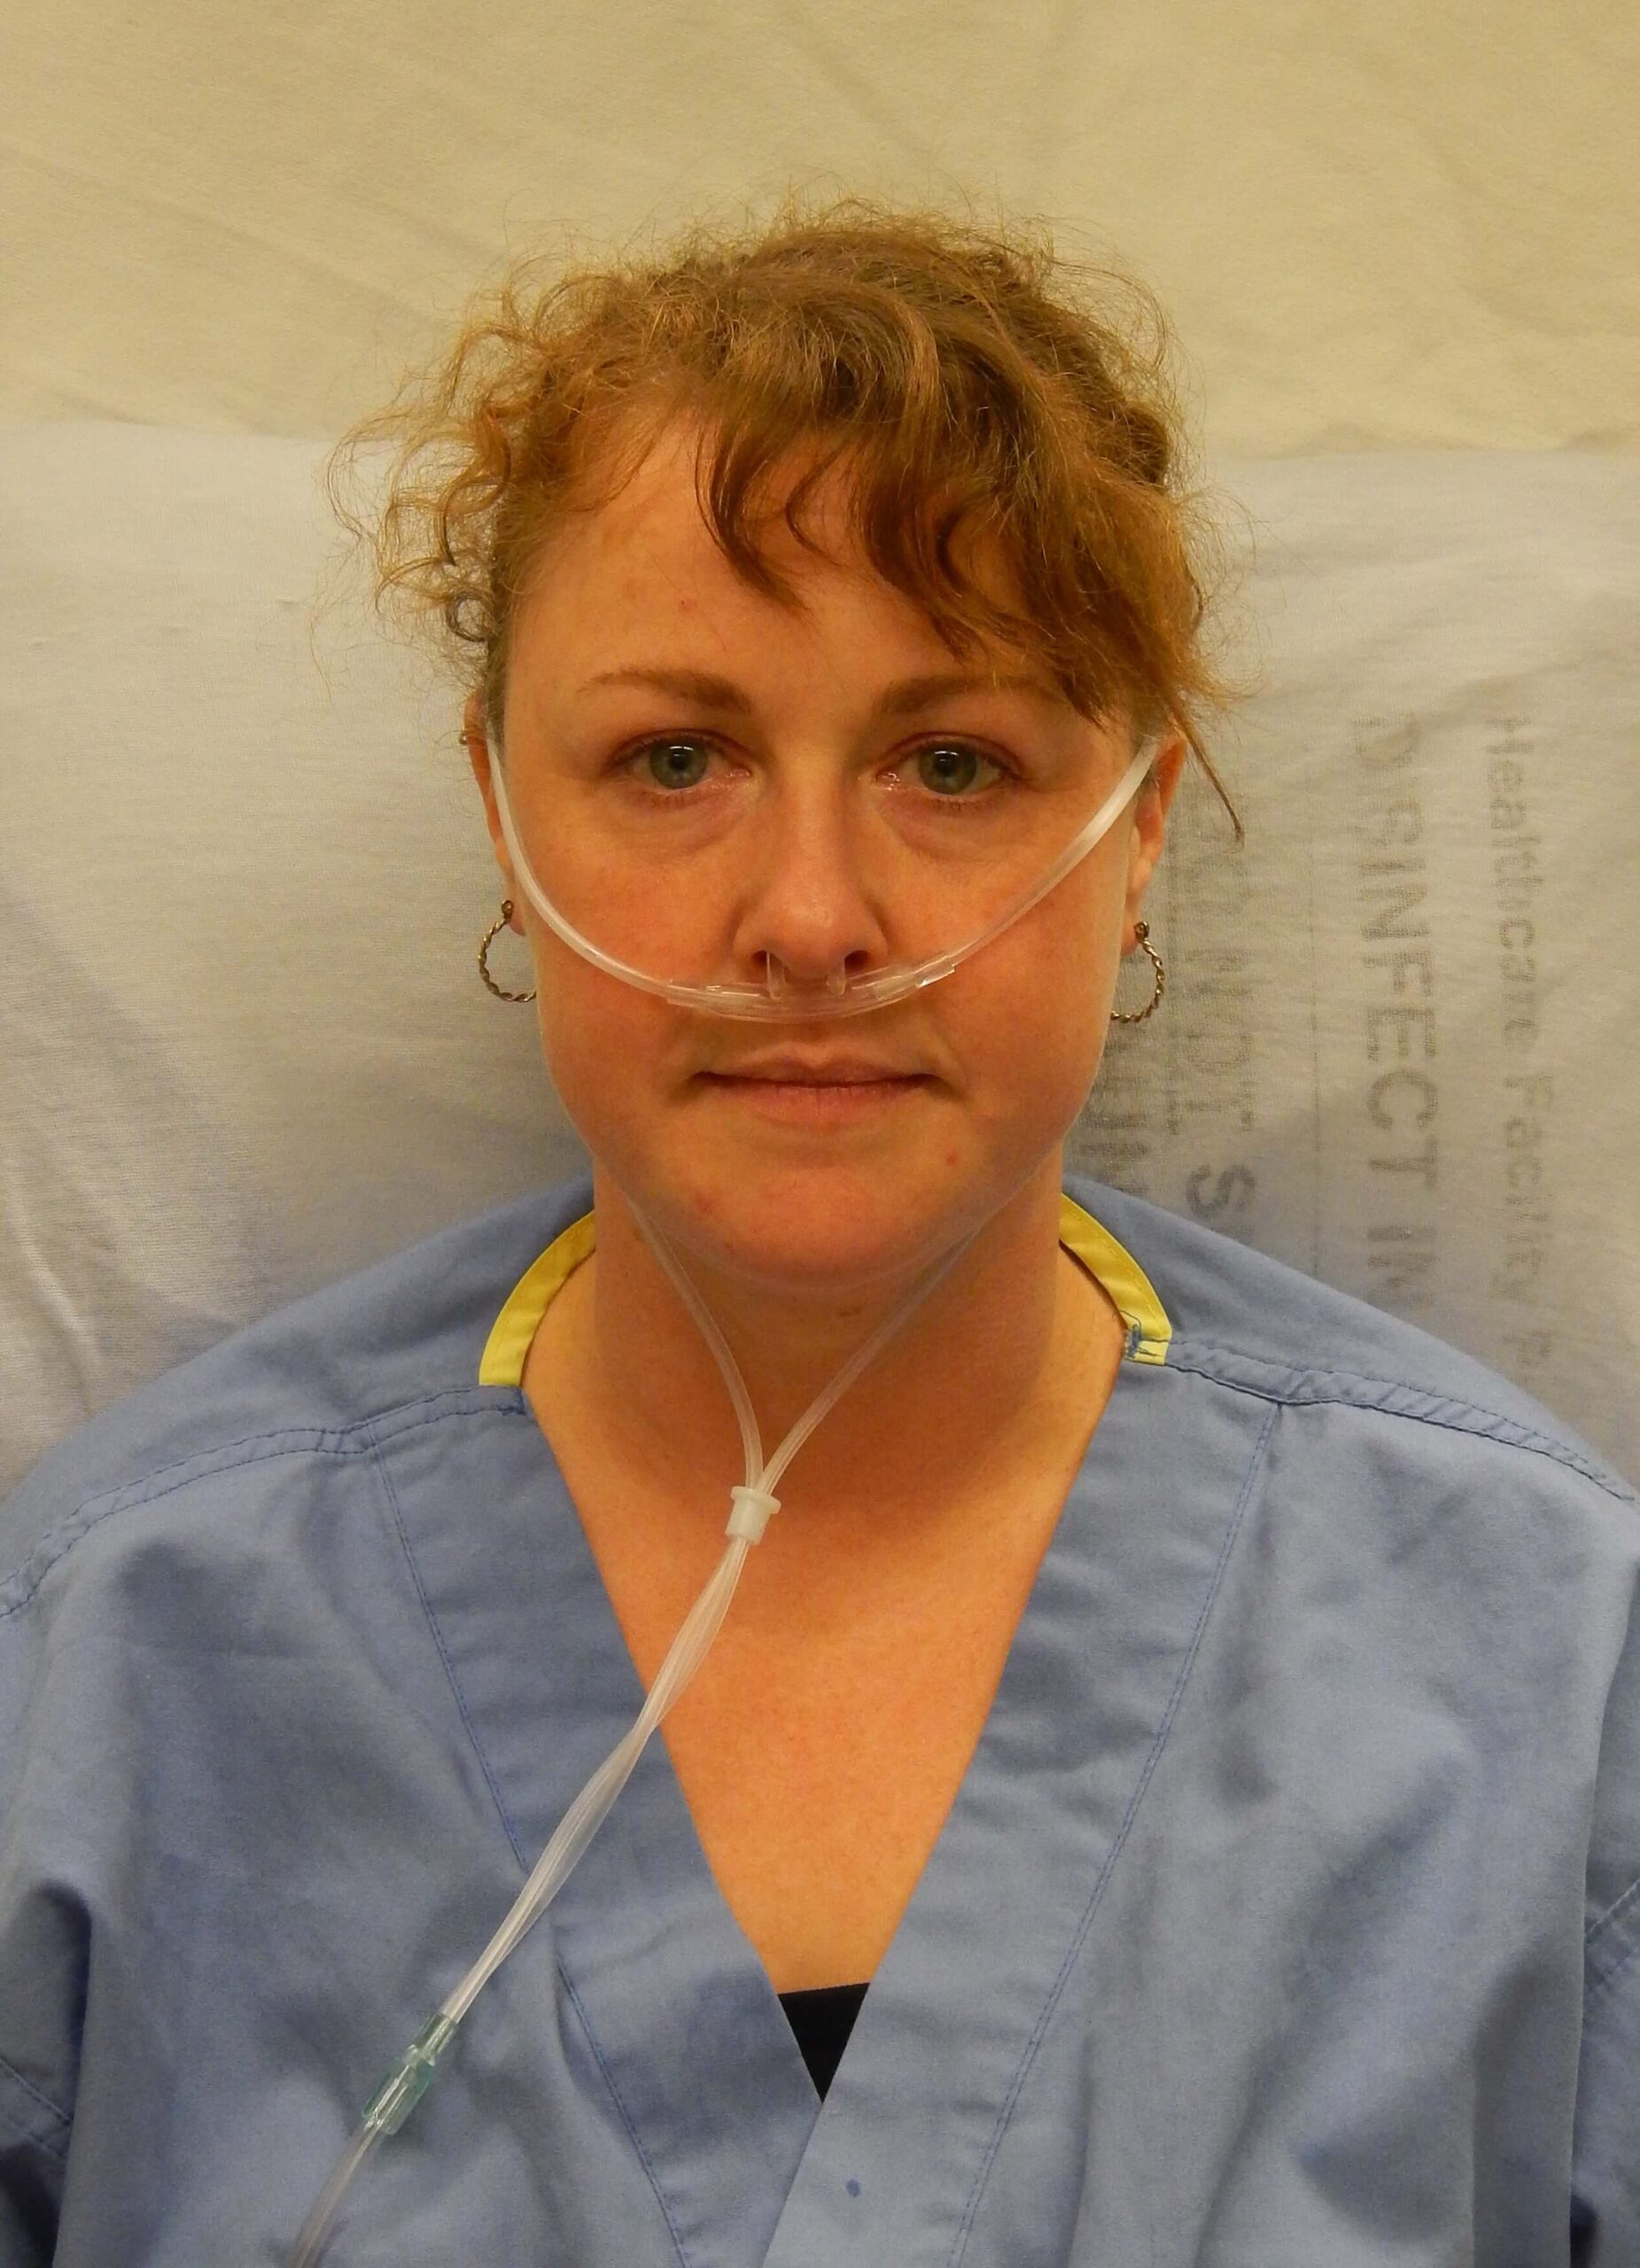 Patient using nasal cannula